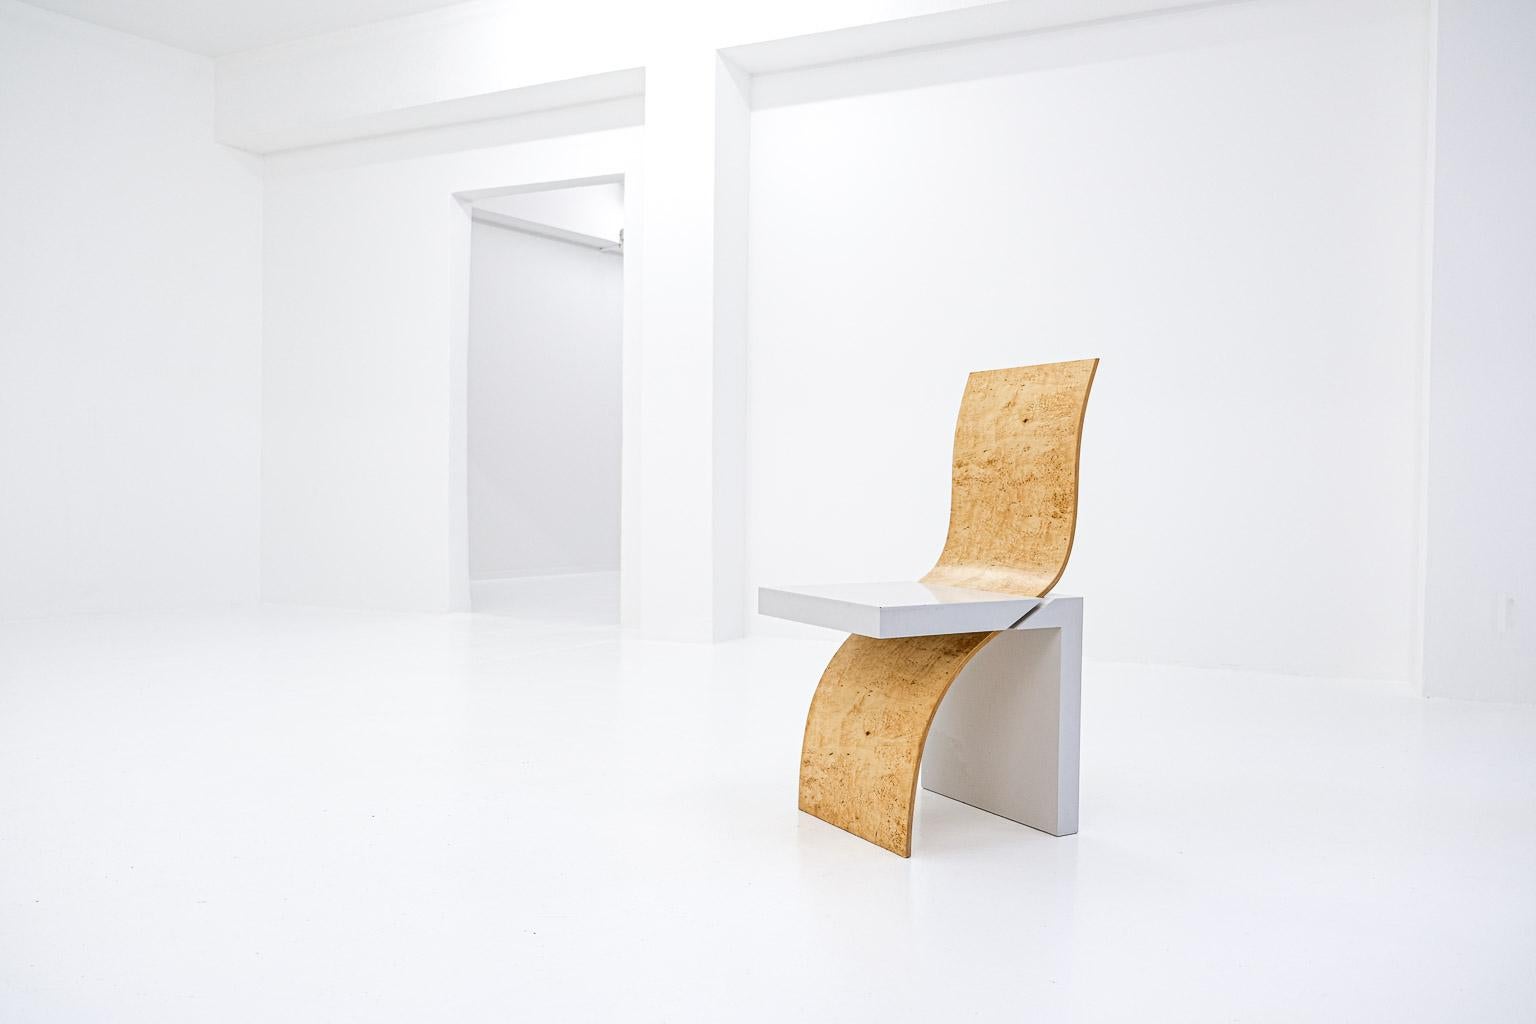 a new wave chair.

back to the eighties – an extremely productive decade in furniture design. in the united states, postmodernism migrated from architecture to interior design; in italy, „memphis“ shocked the friends of the straightforward „form